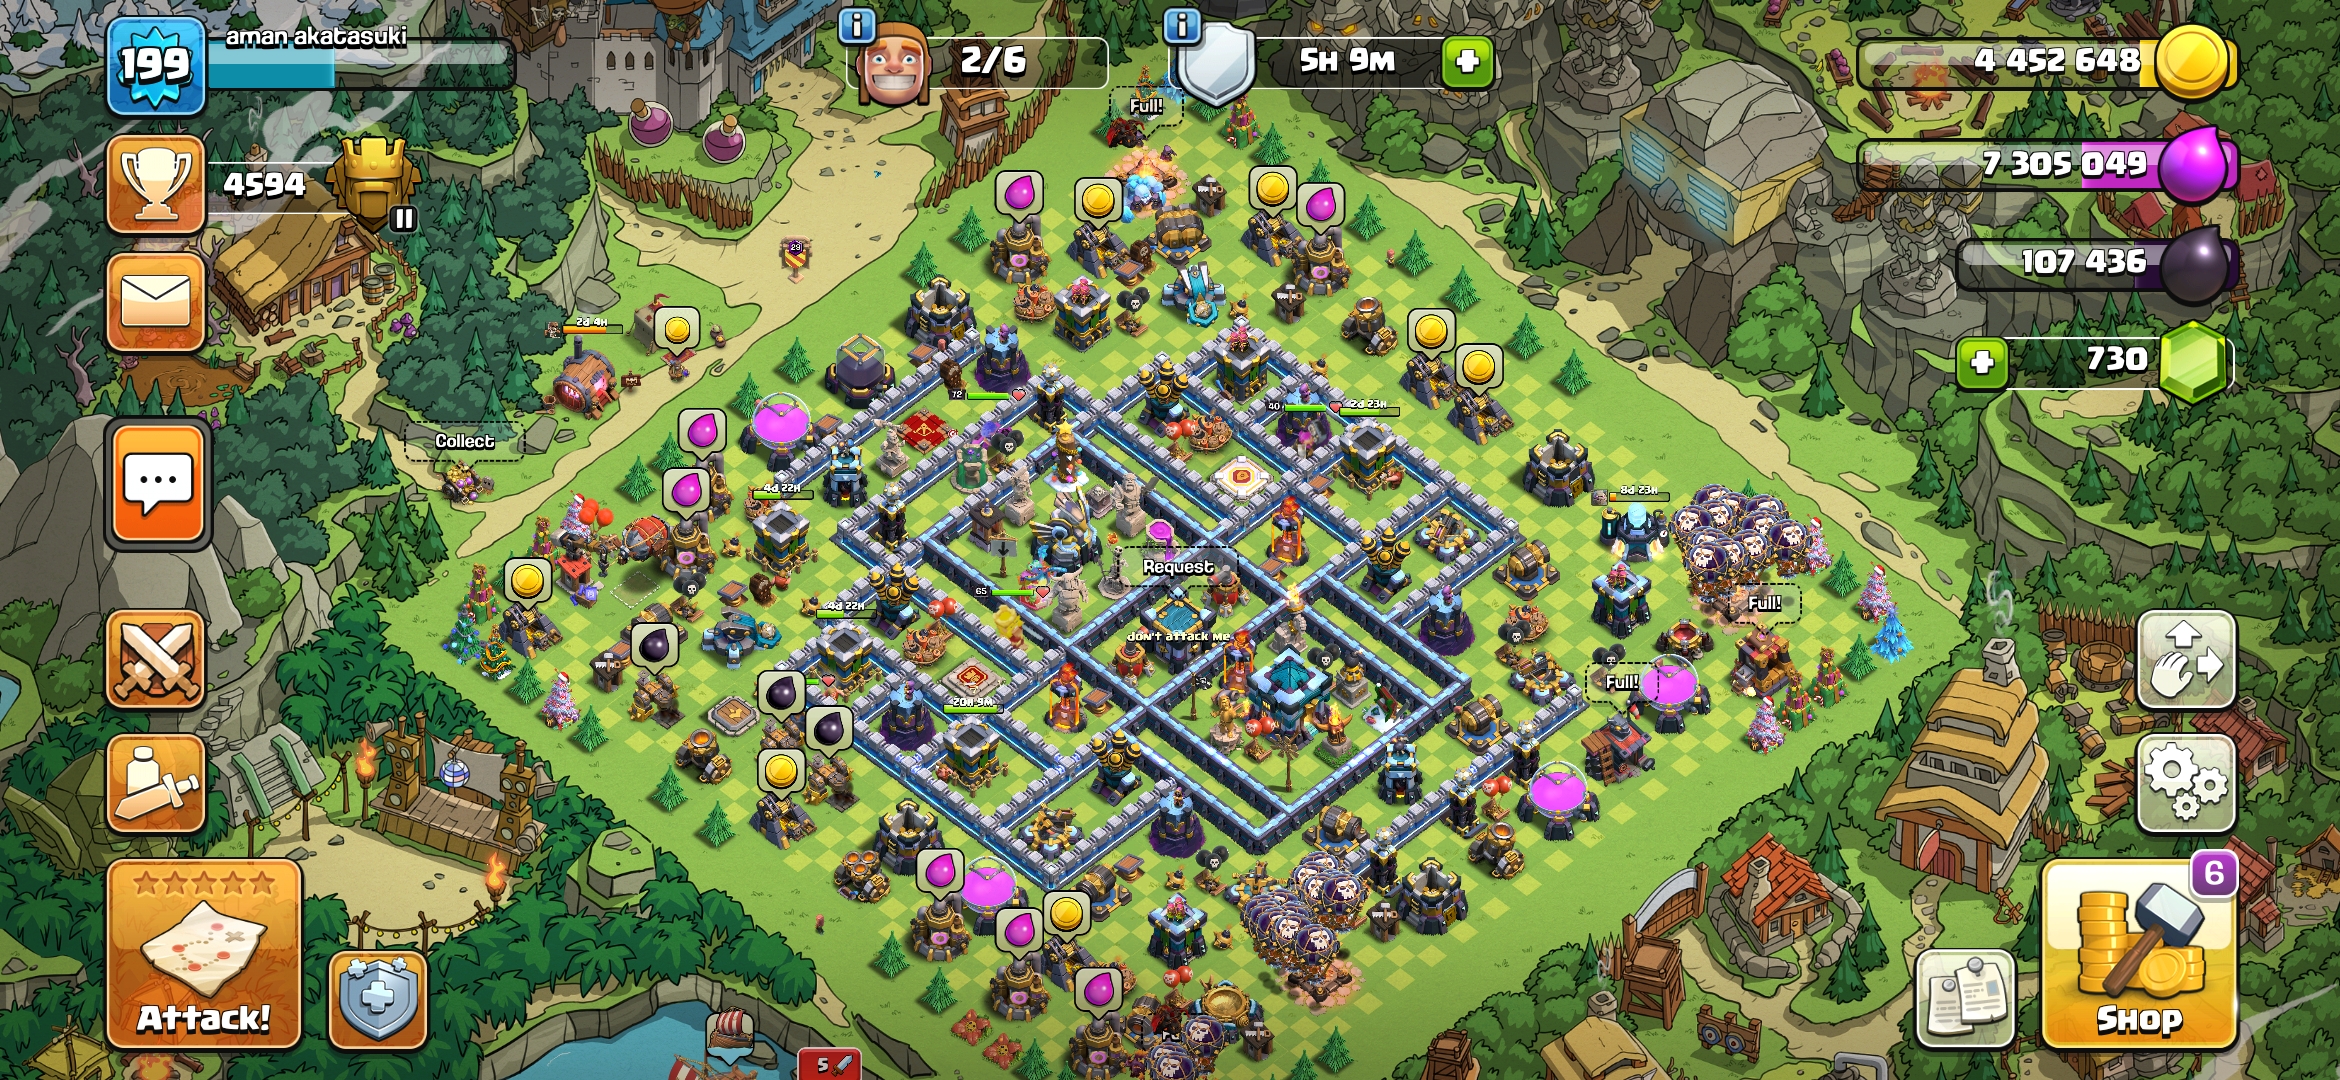 Th13 max and builder base 10 max